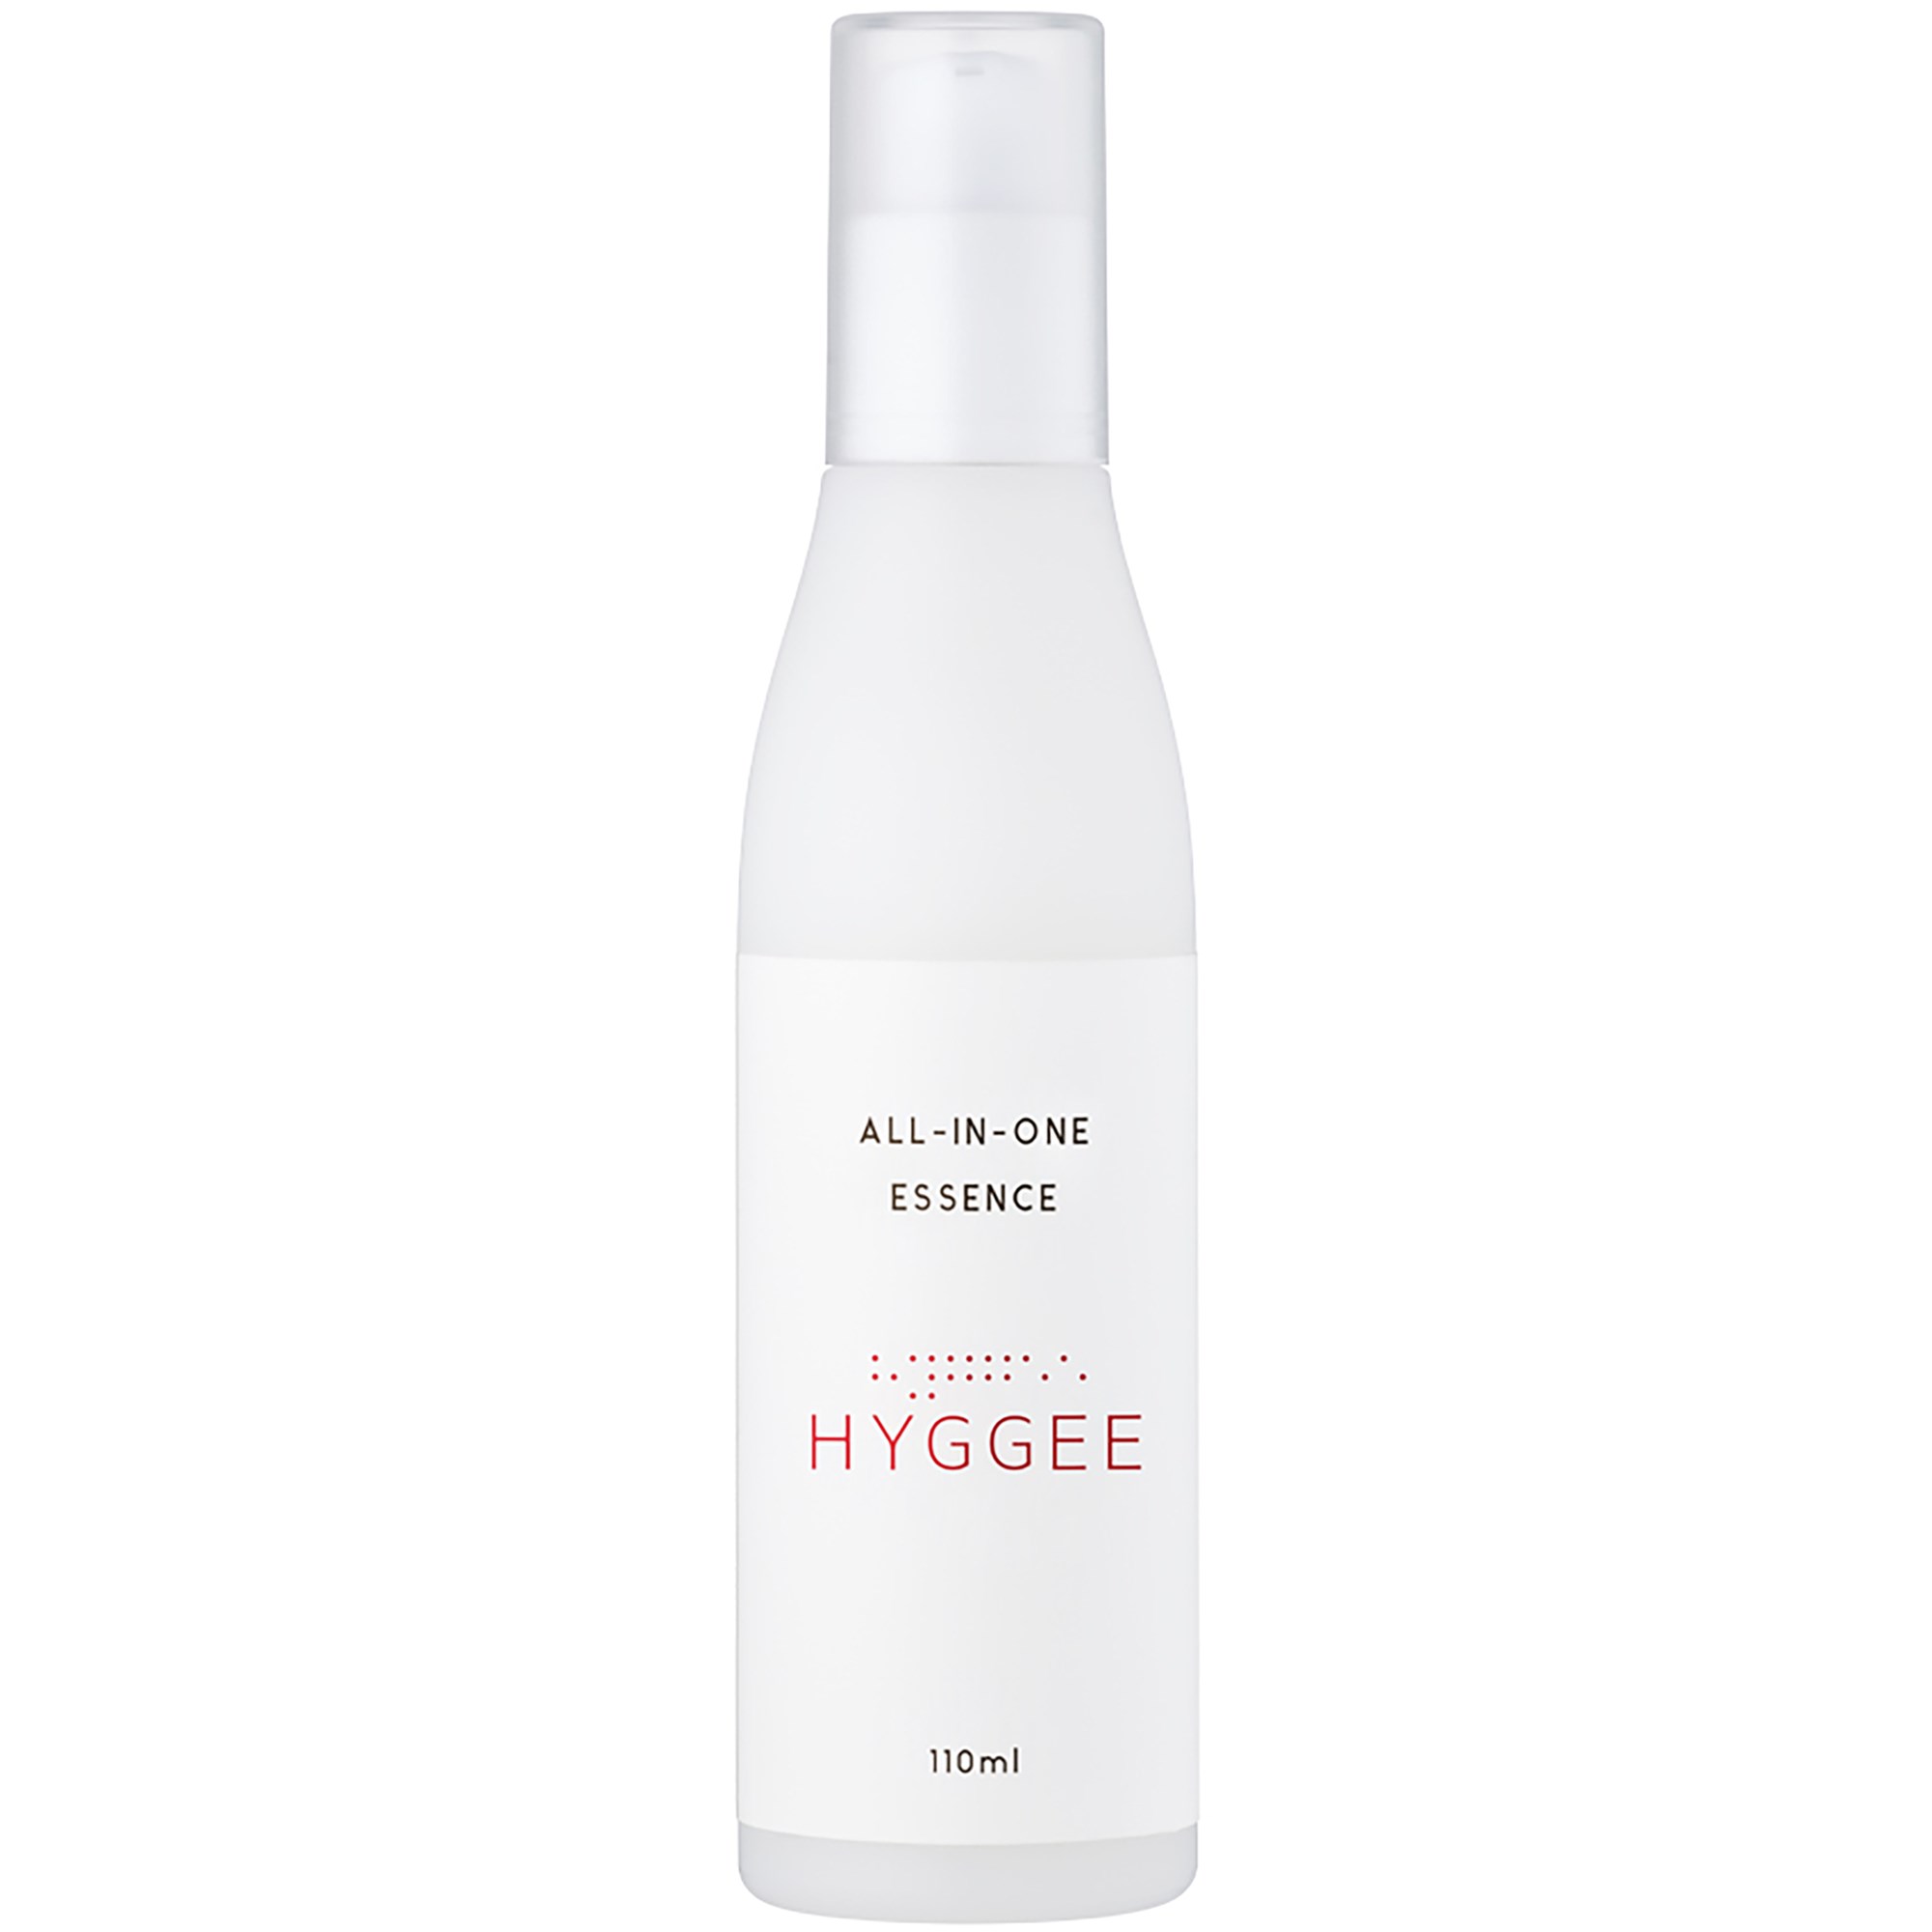 HYGGEE All-in-One Essence 110 ml